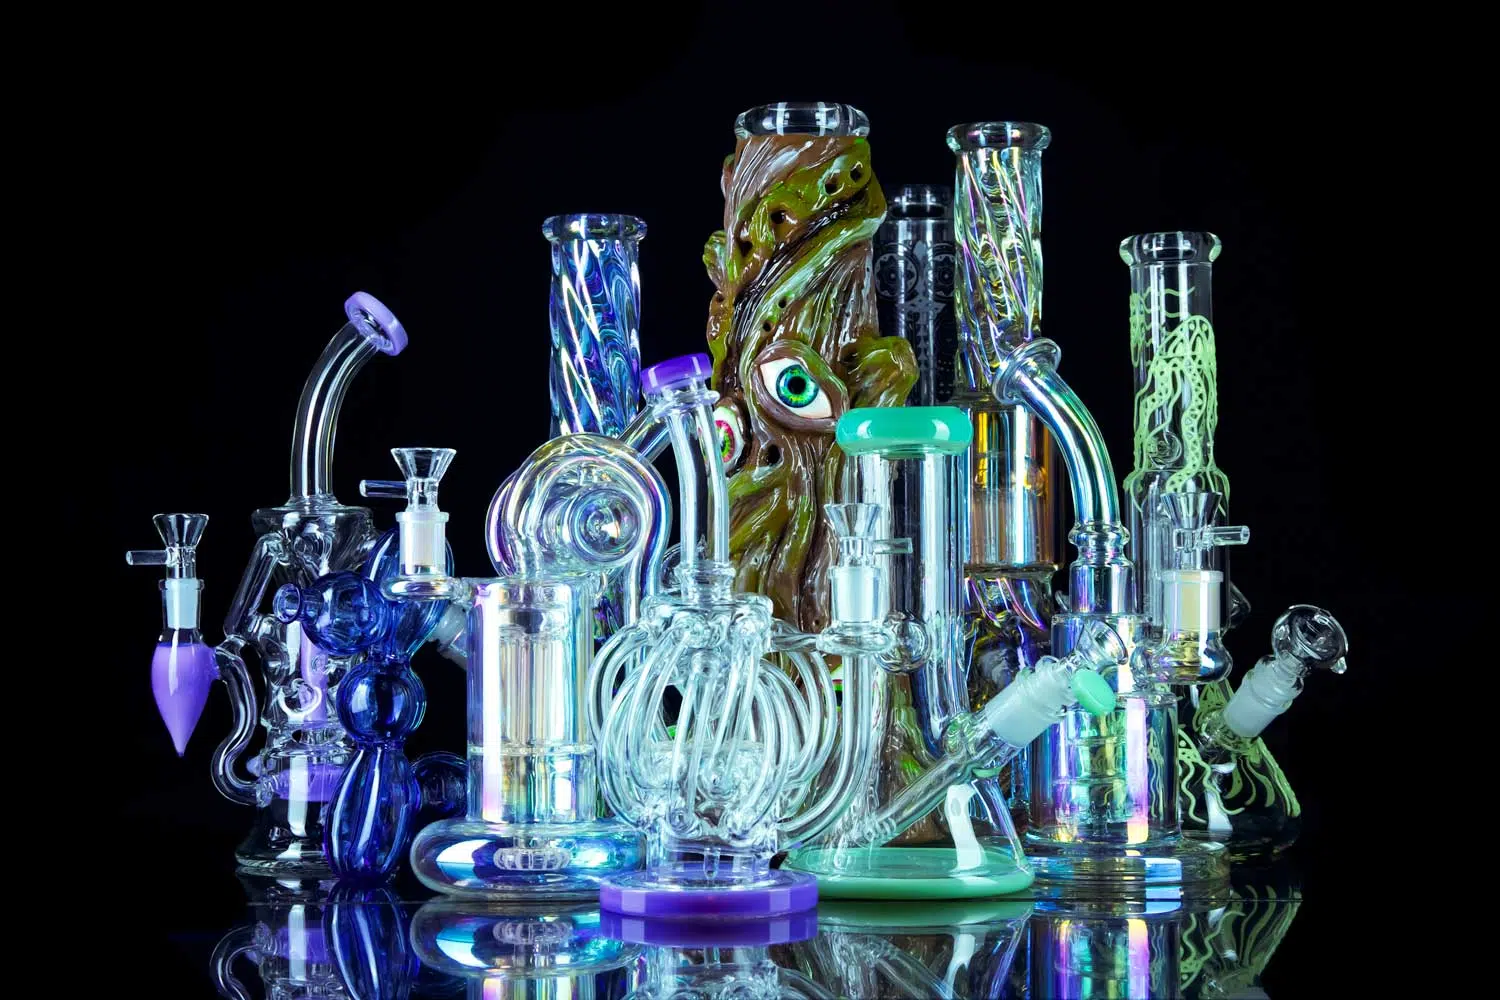 Glass bongs for sale on black table